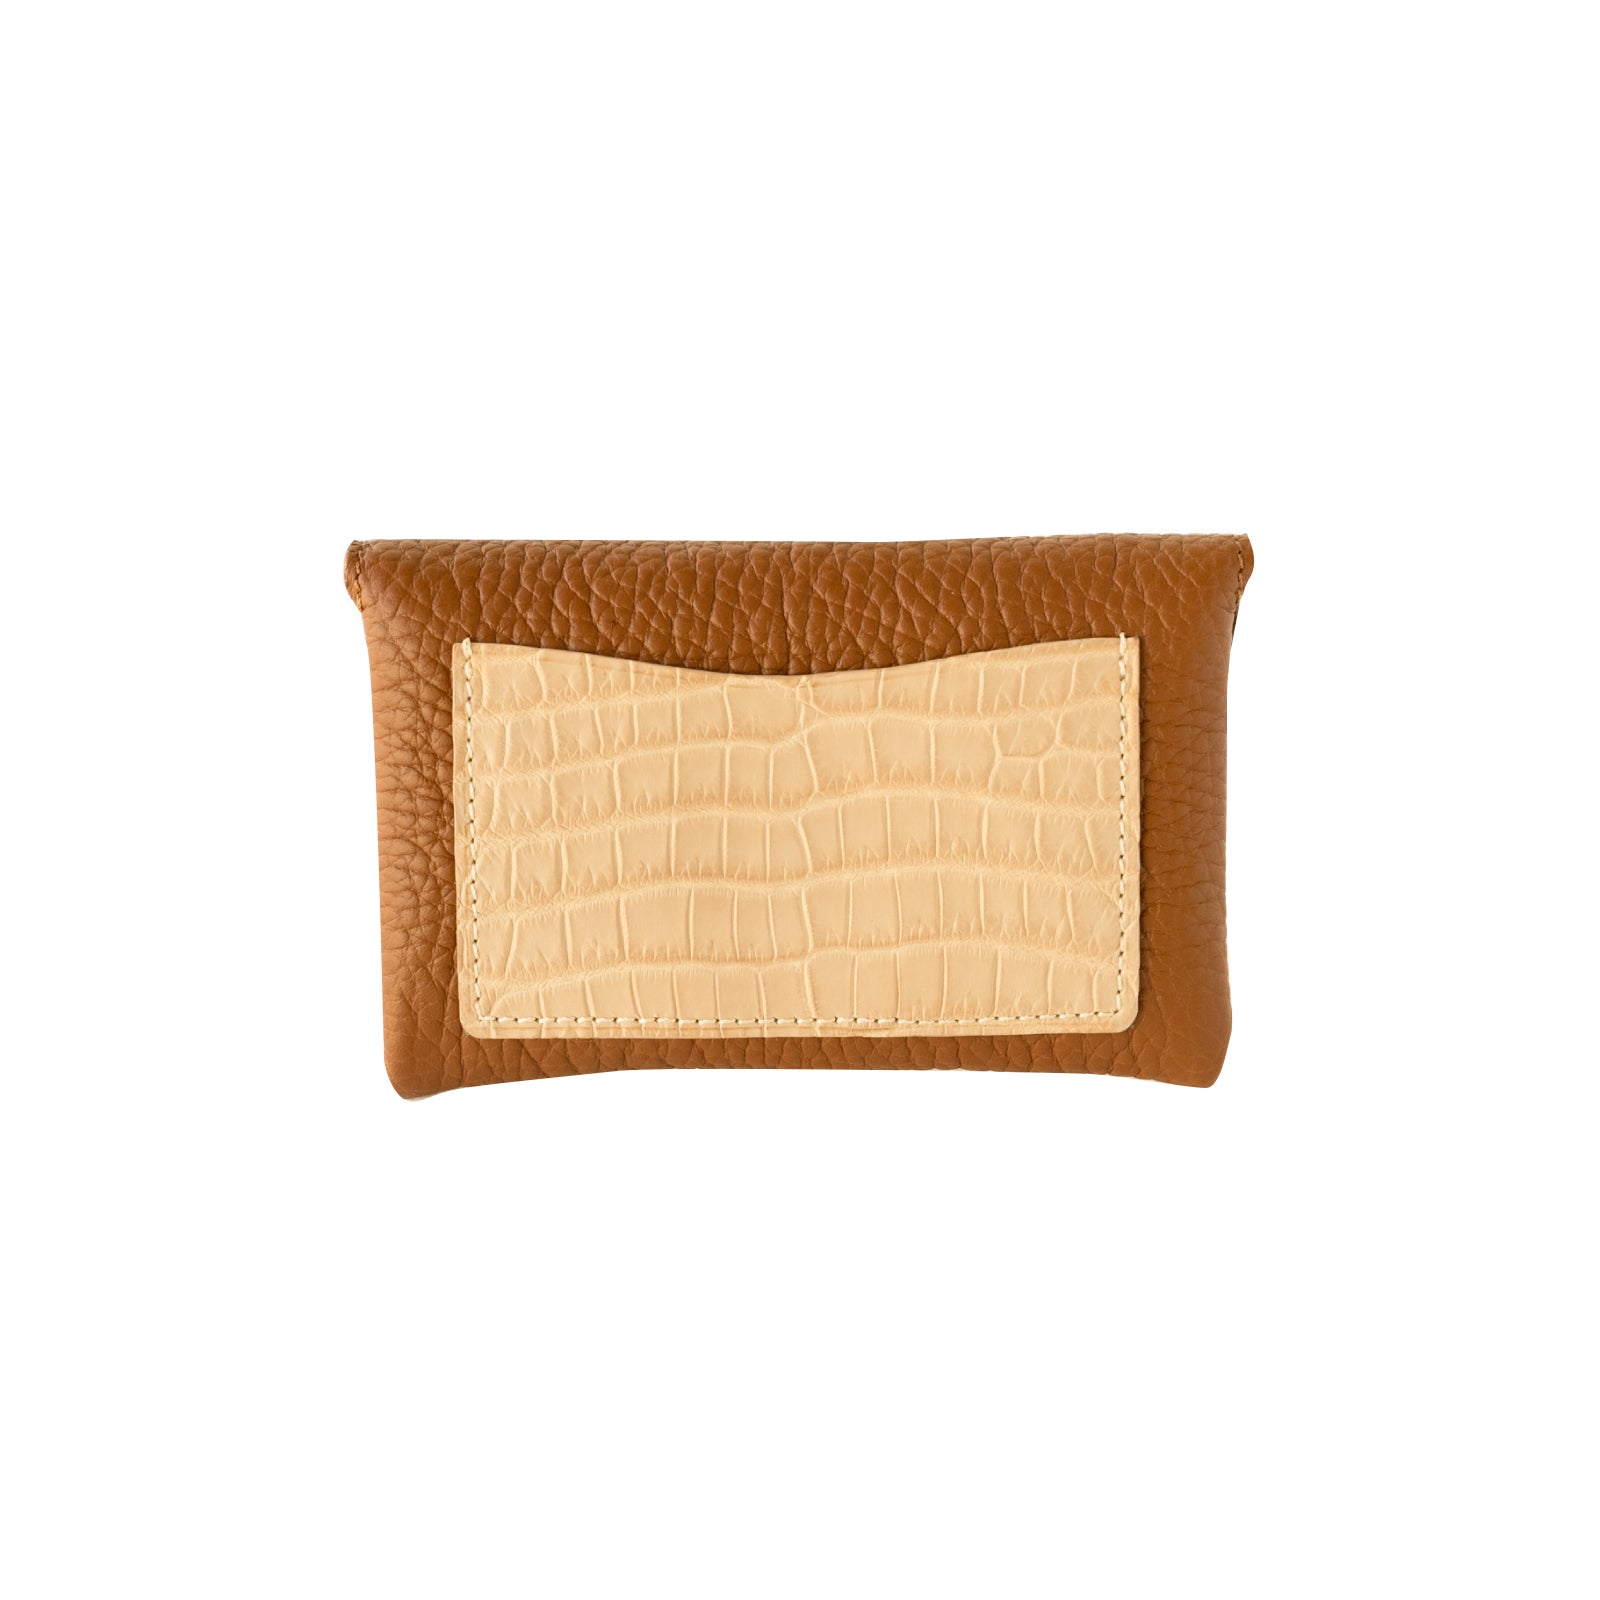 [6th Anniversary Sale] Soft Leather Flap Middle Wallet (with Crocodile Pocket) Taurillon Clemence